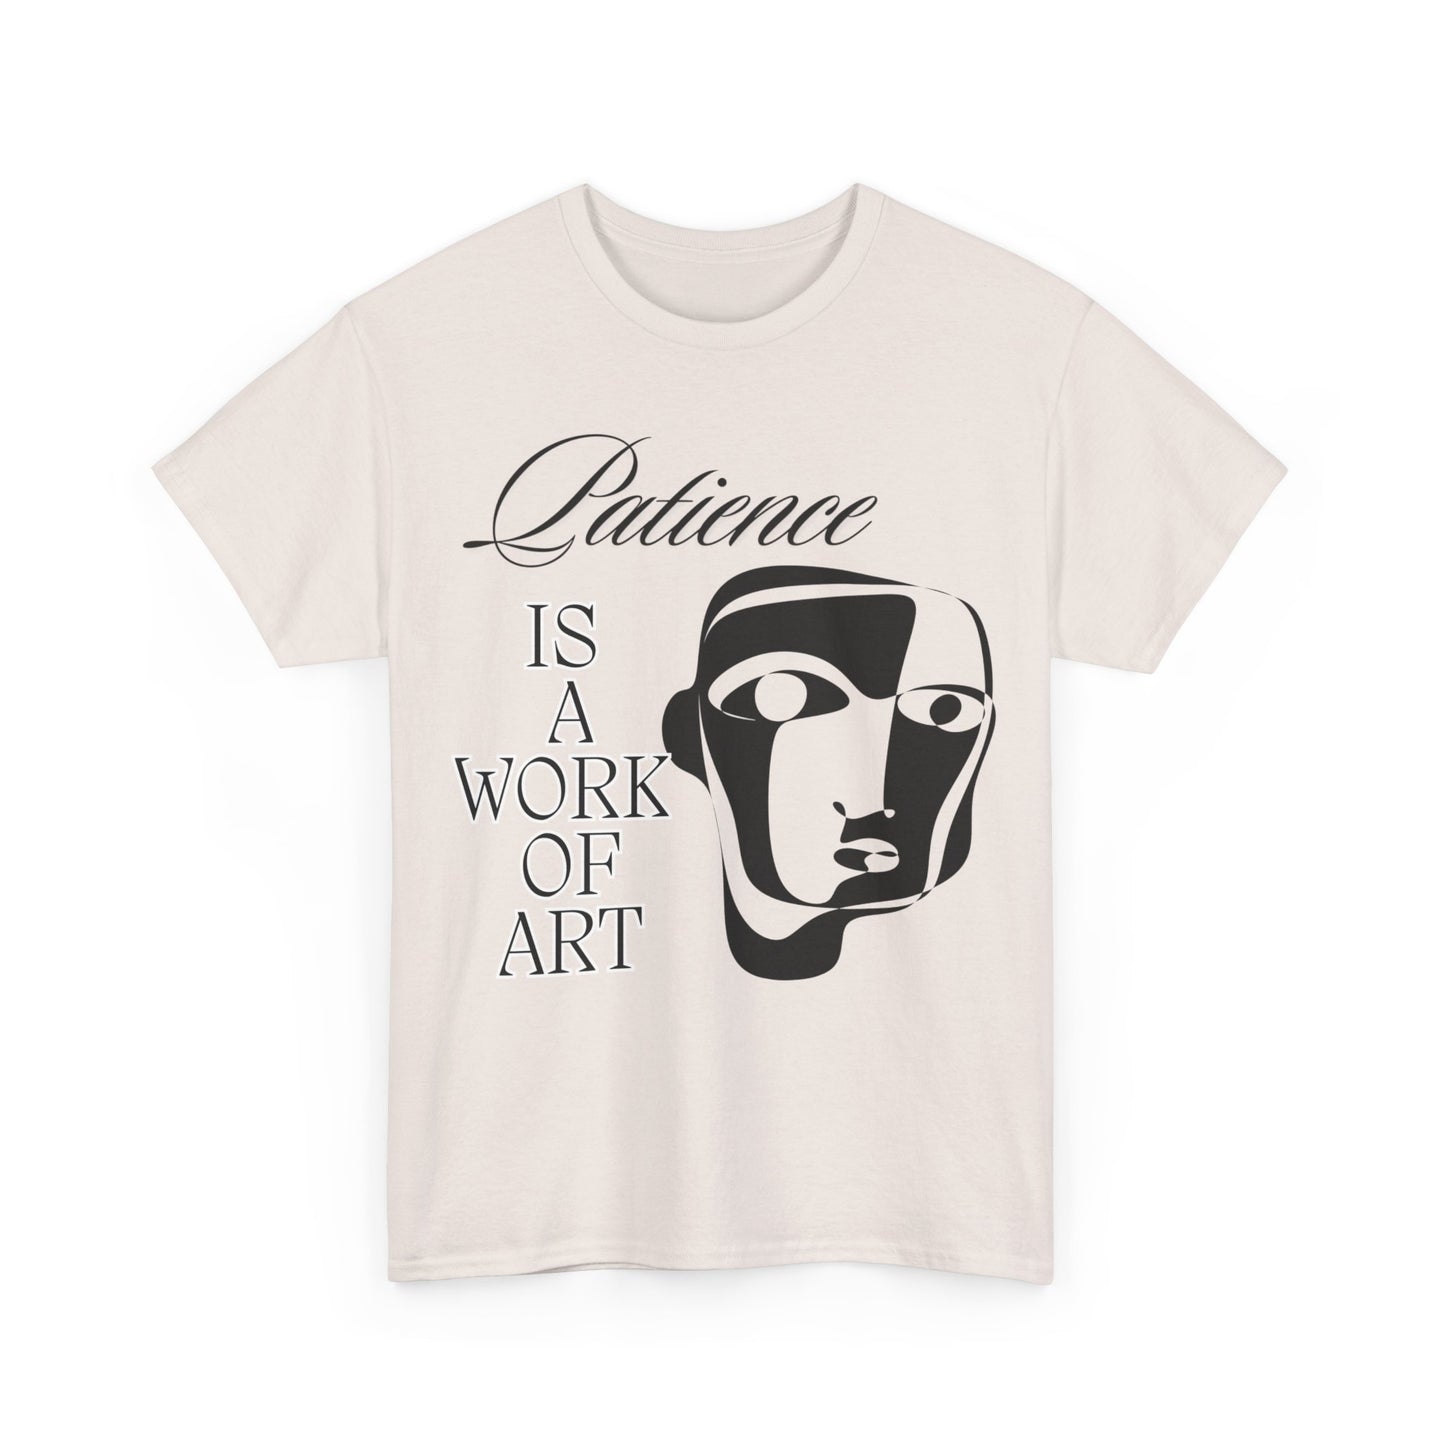 Heavy Cotton Tee with Abstract Face Drawing - "Patience is a Work of Art"